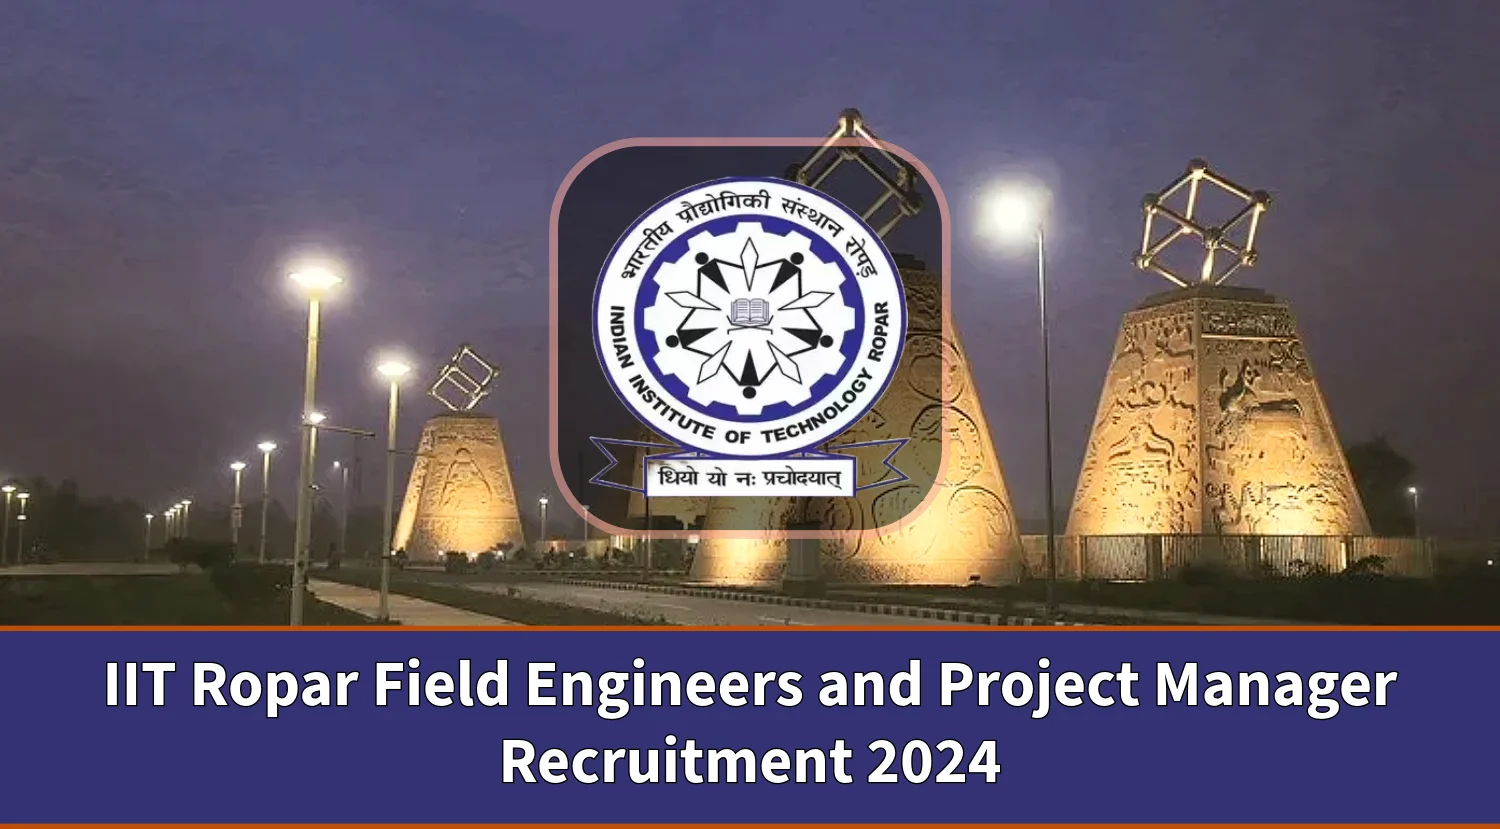 IIT Ropar Field Engineers and Project Manager Recruitment 2024